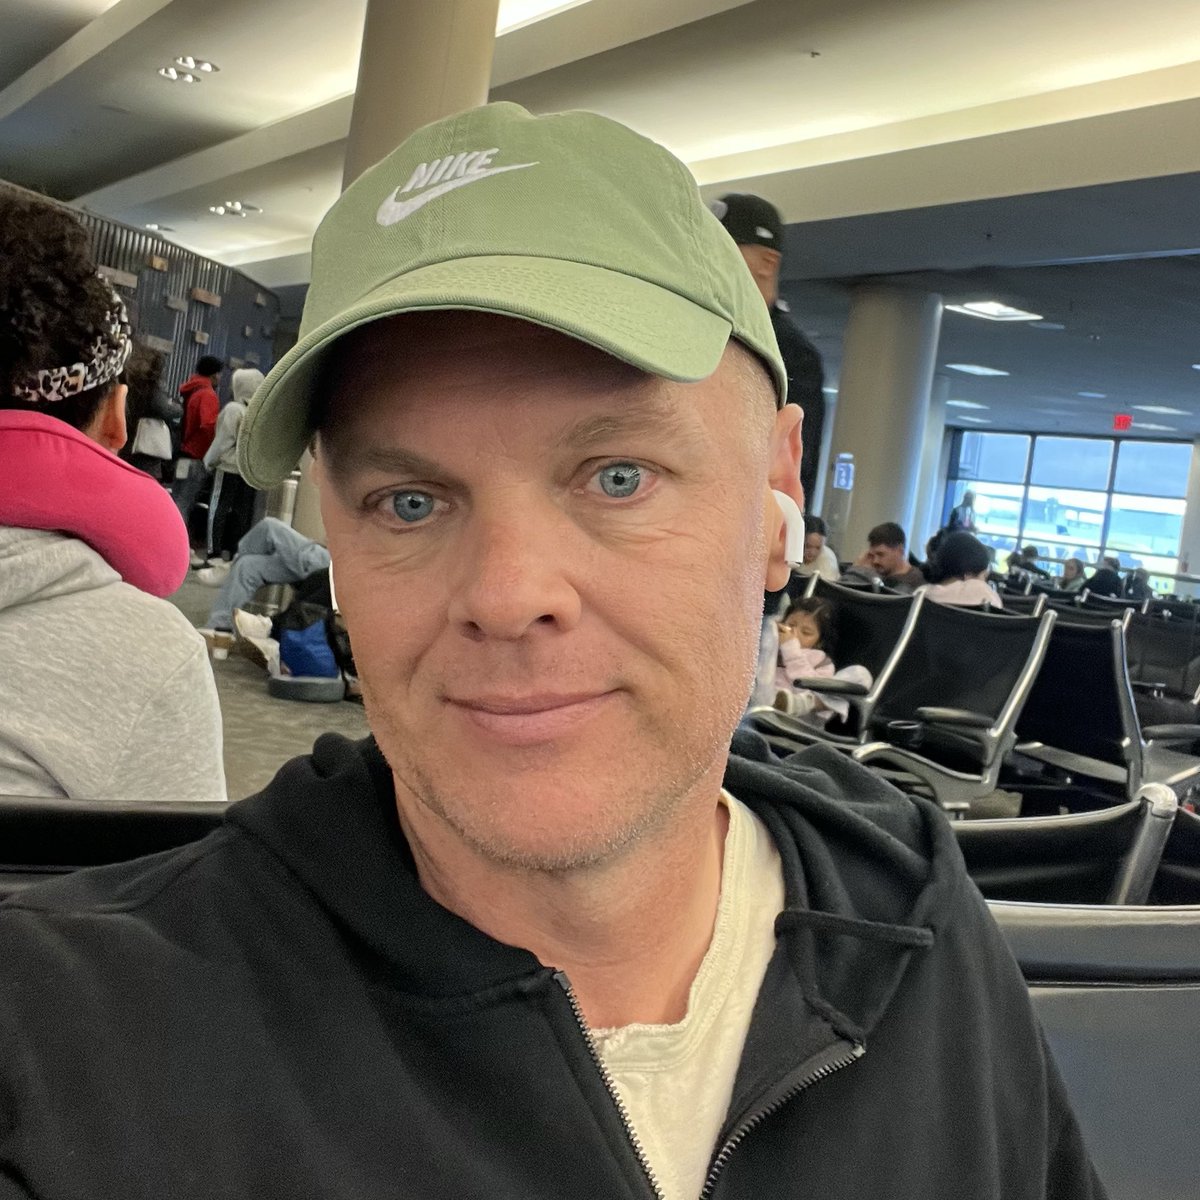 It was a tough 4:30 am wake up and now I’m relaxing at beautiful LAX waiting to catch my flight to Florida for the @BzCannabis conference. Excited to moderate the opening keynote with $GLASF CEO @kylekazanceo tomorrow morning and see everyone in person!